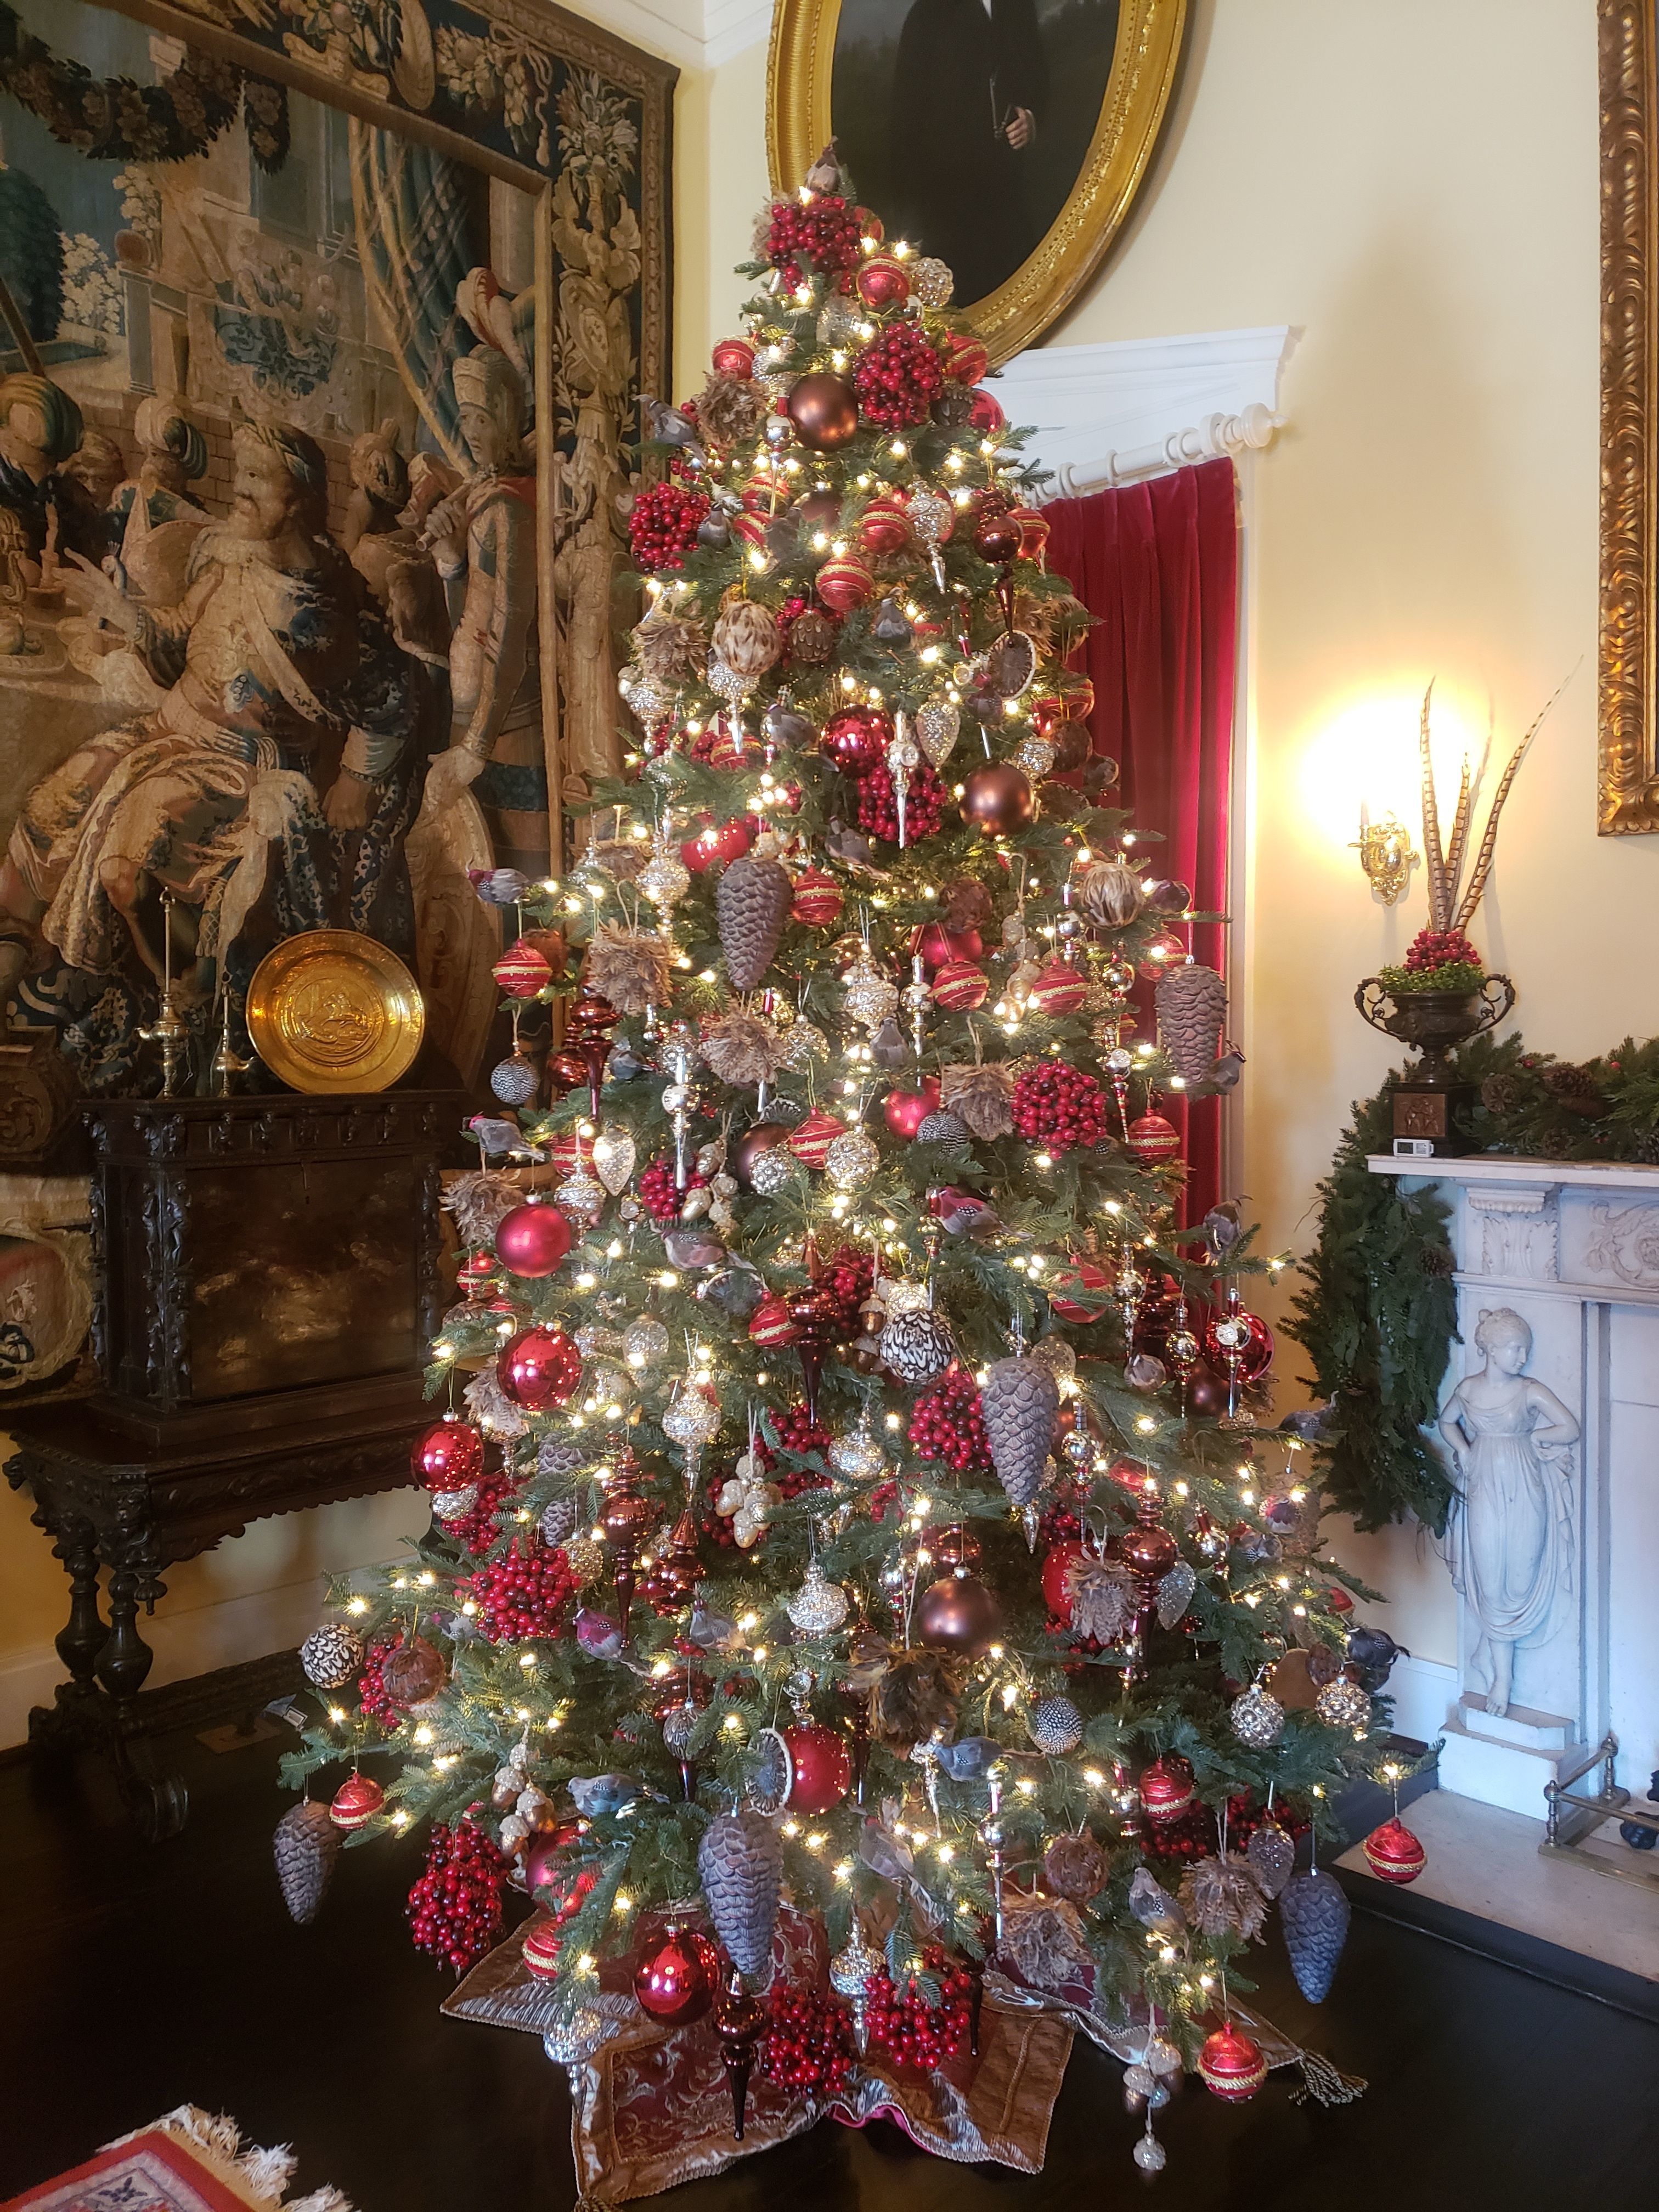 Holiday Tours of the Davis Mansion at Morven Park